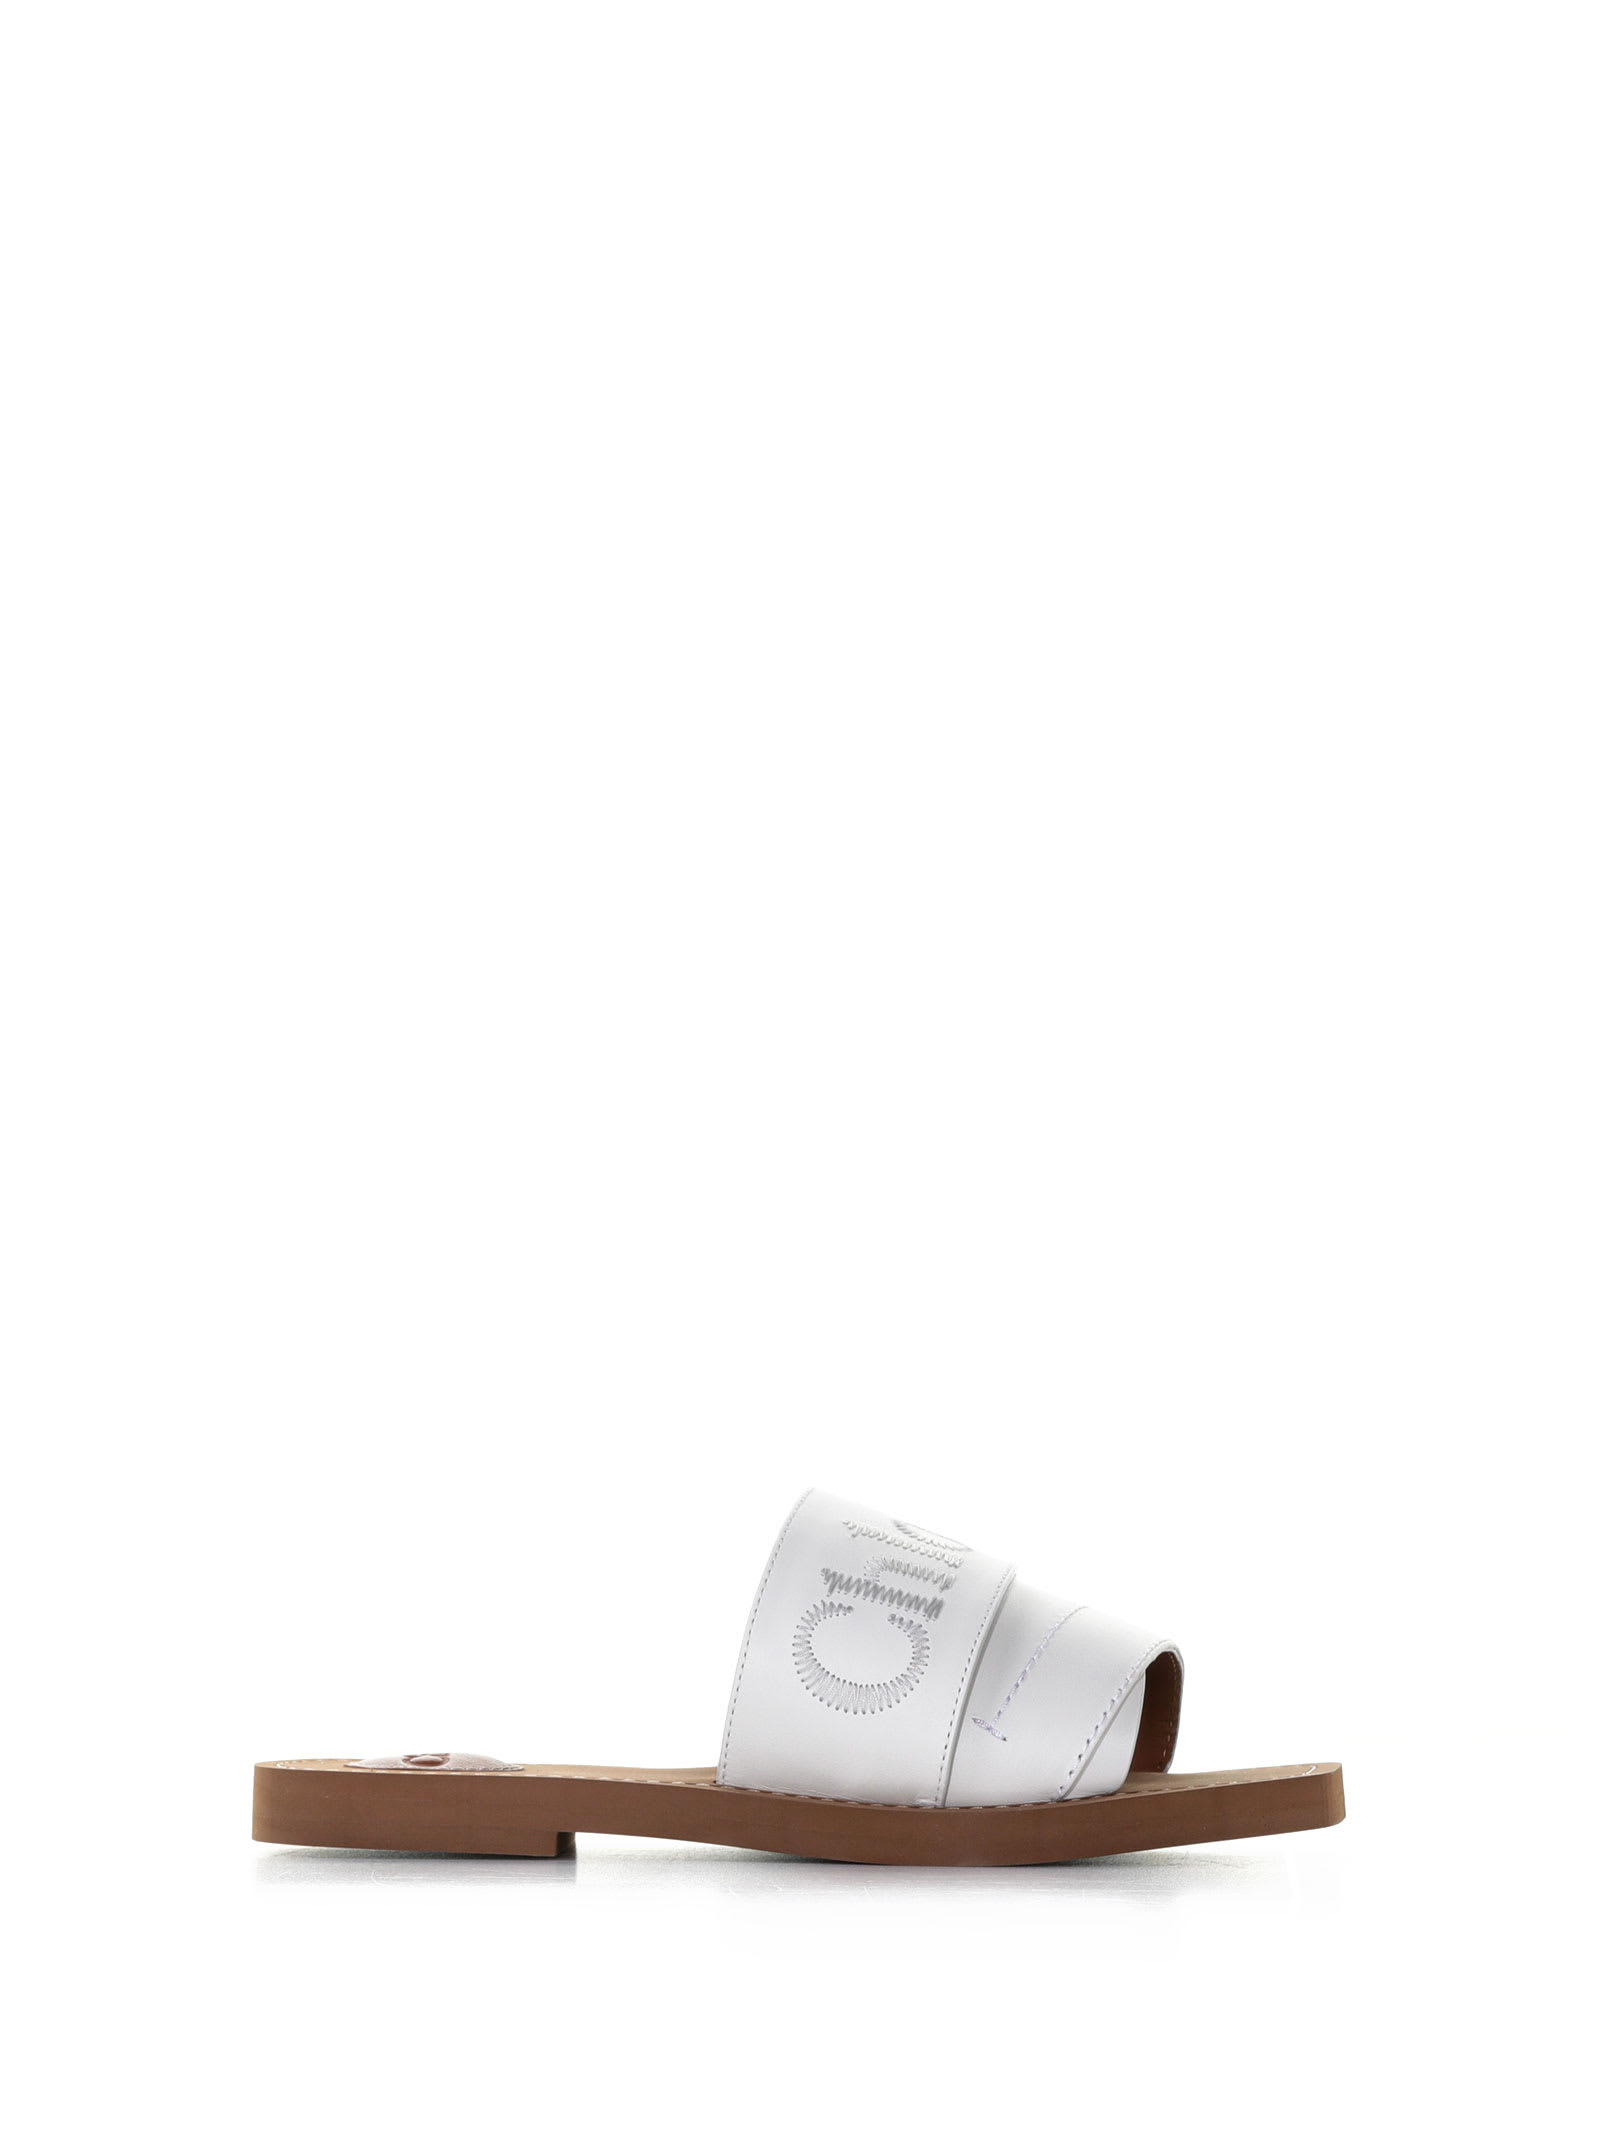 Chloé Woody Smooth Leather Slide Sandals